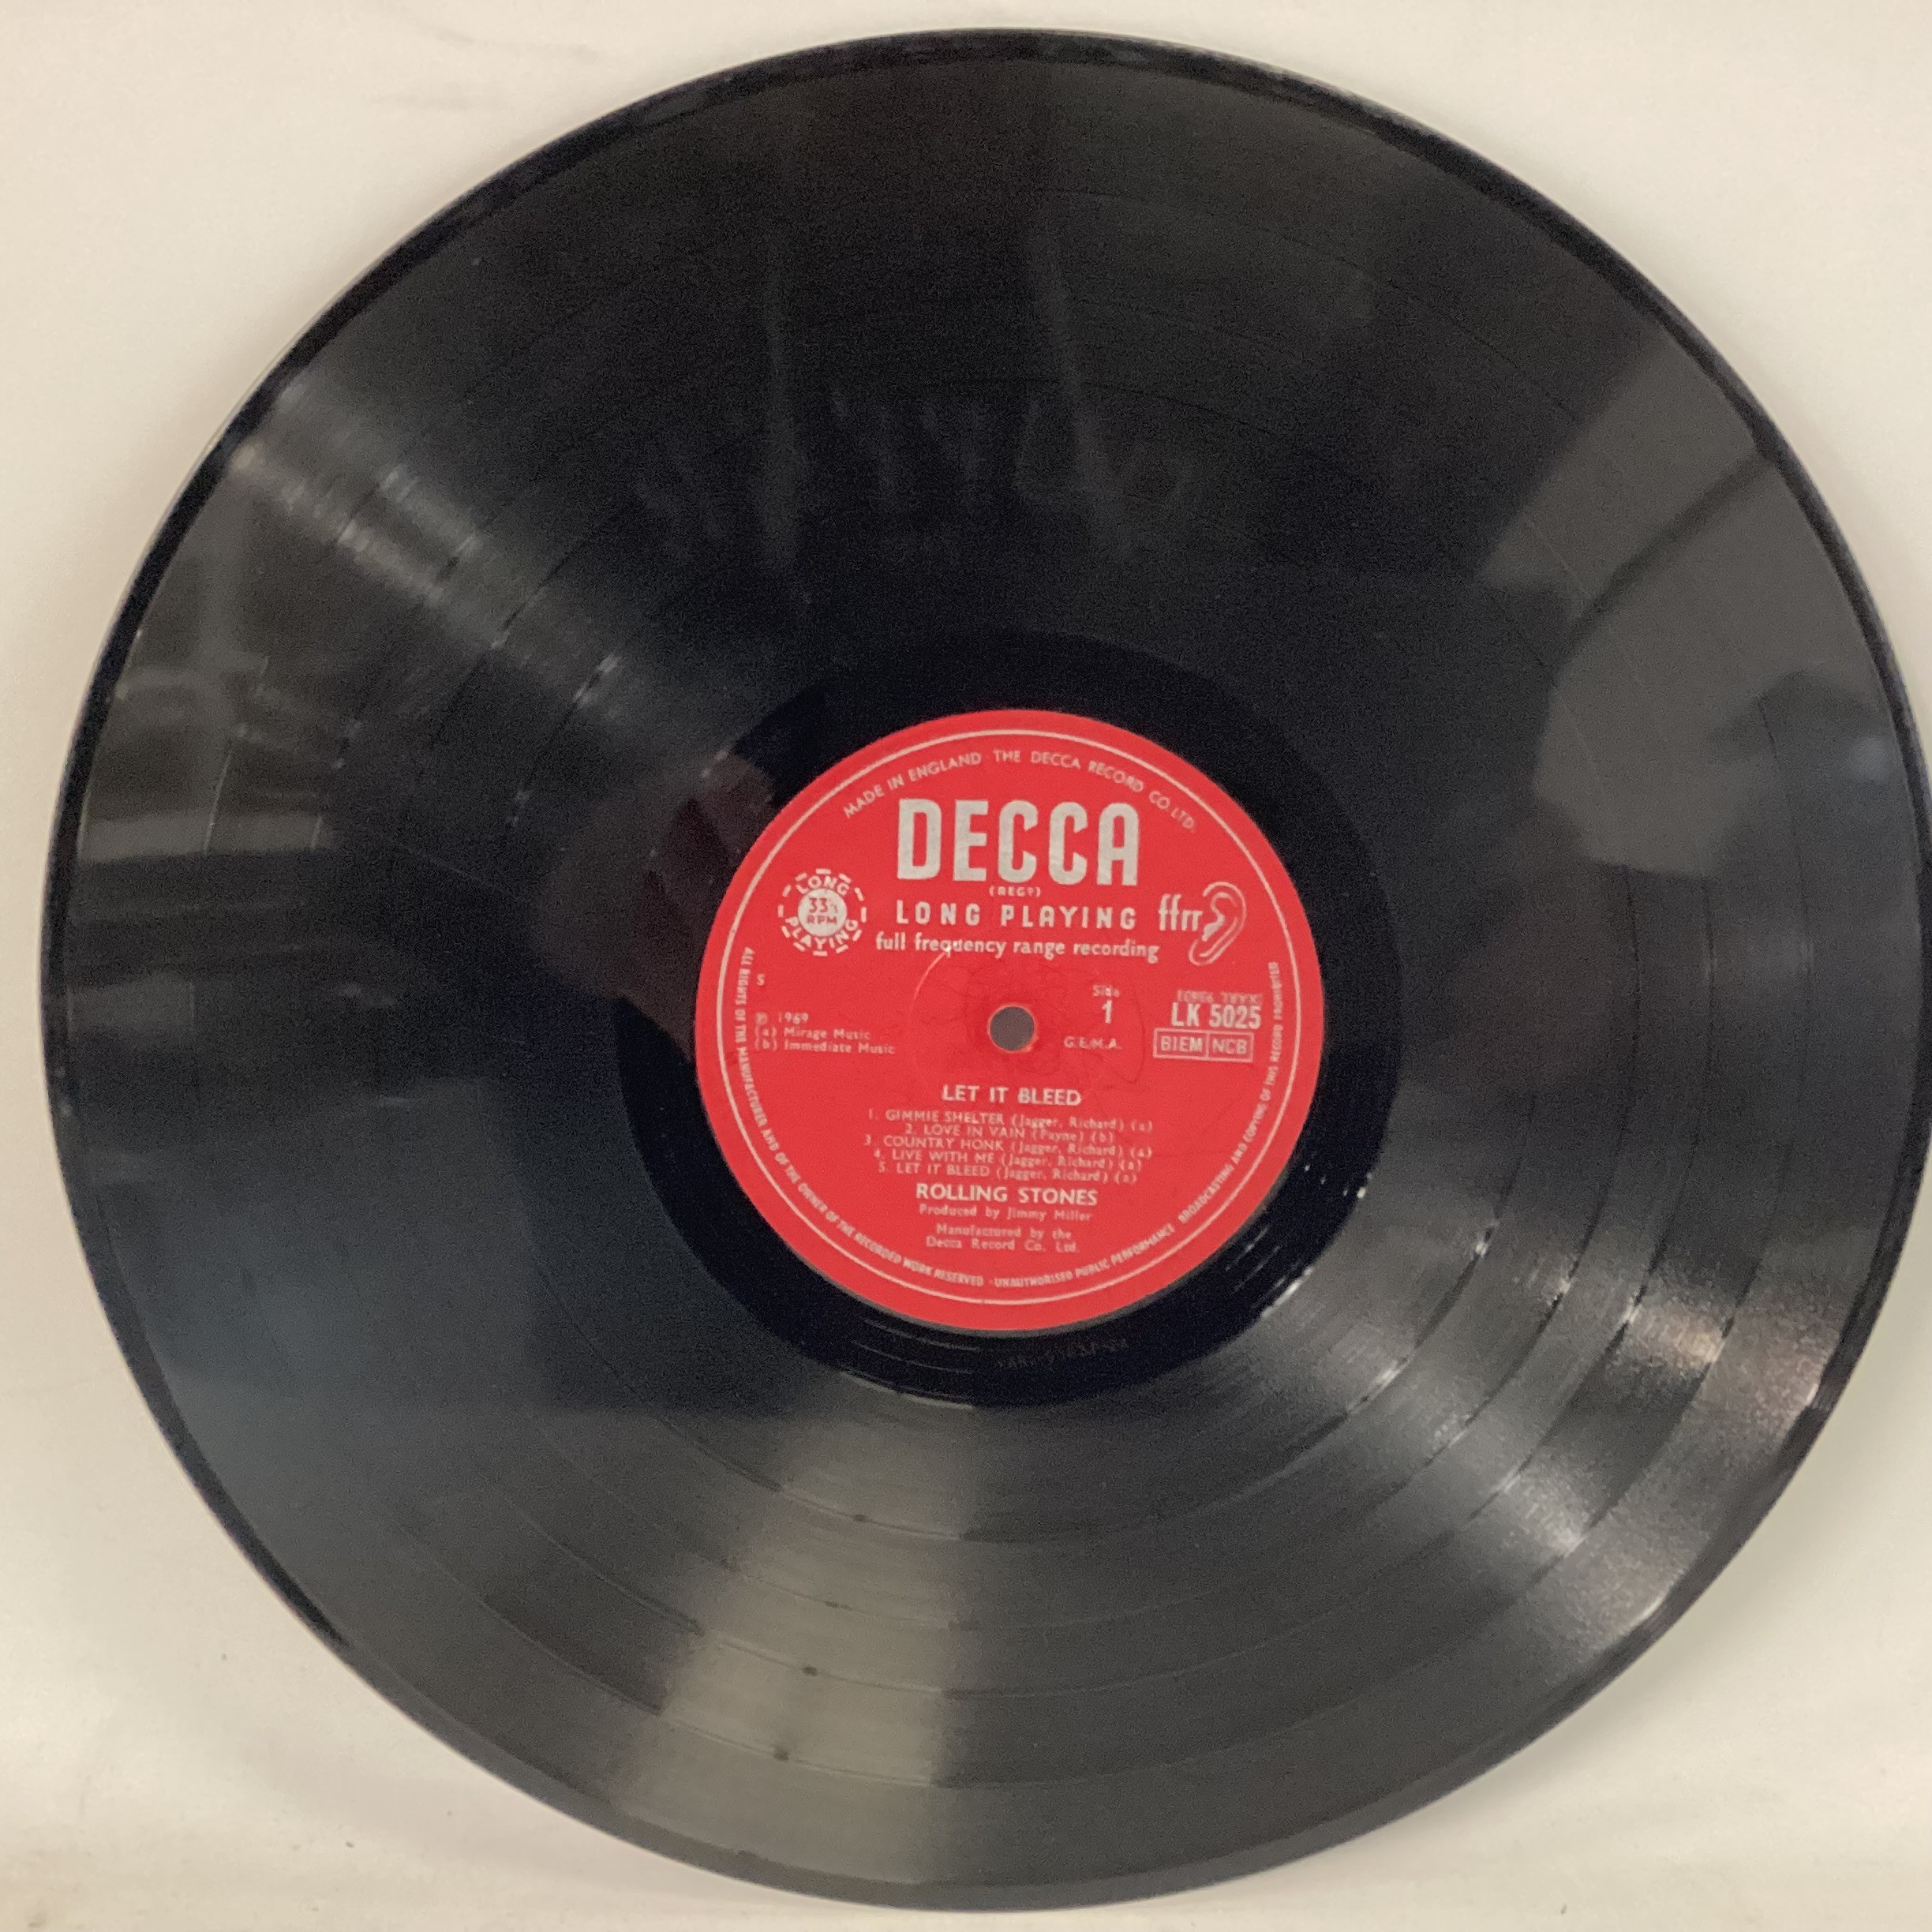 ROLLING STONES ‘LET IT BLEED’ UNBOXED DECCA LP. Great album found here with unboxed Decca label logo - Image 4 of 5